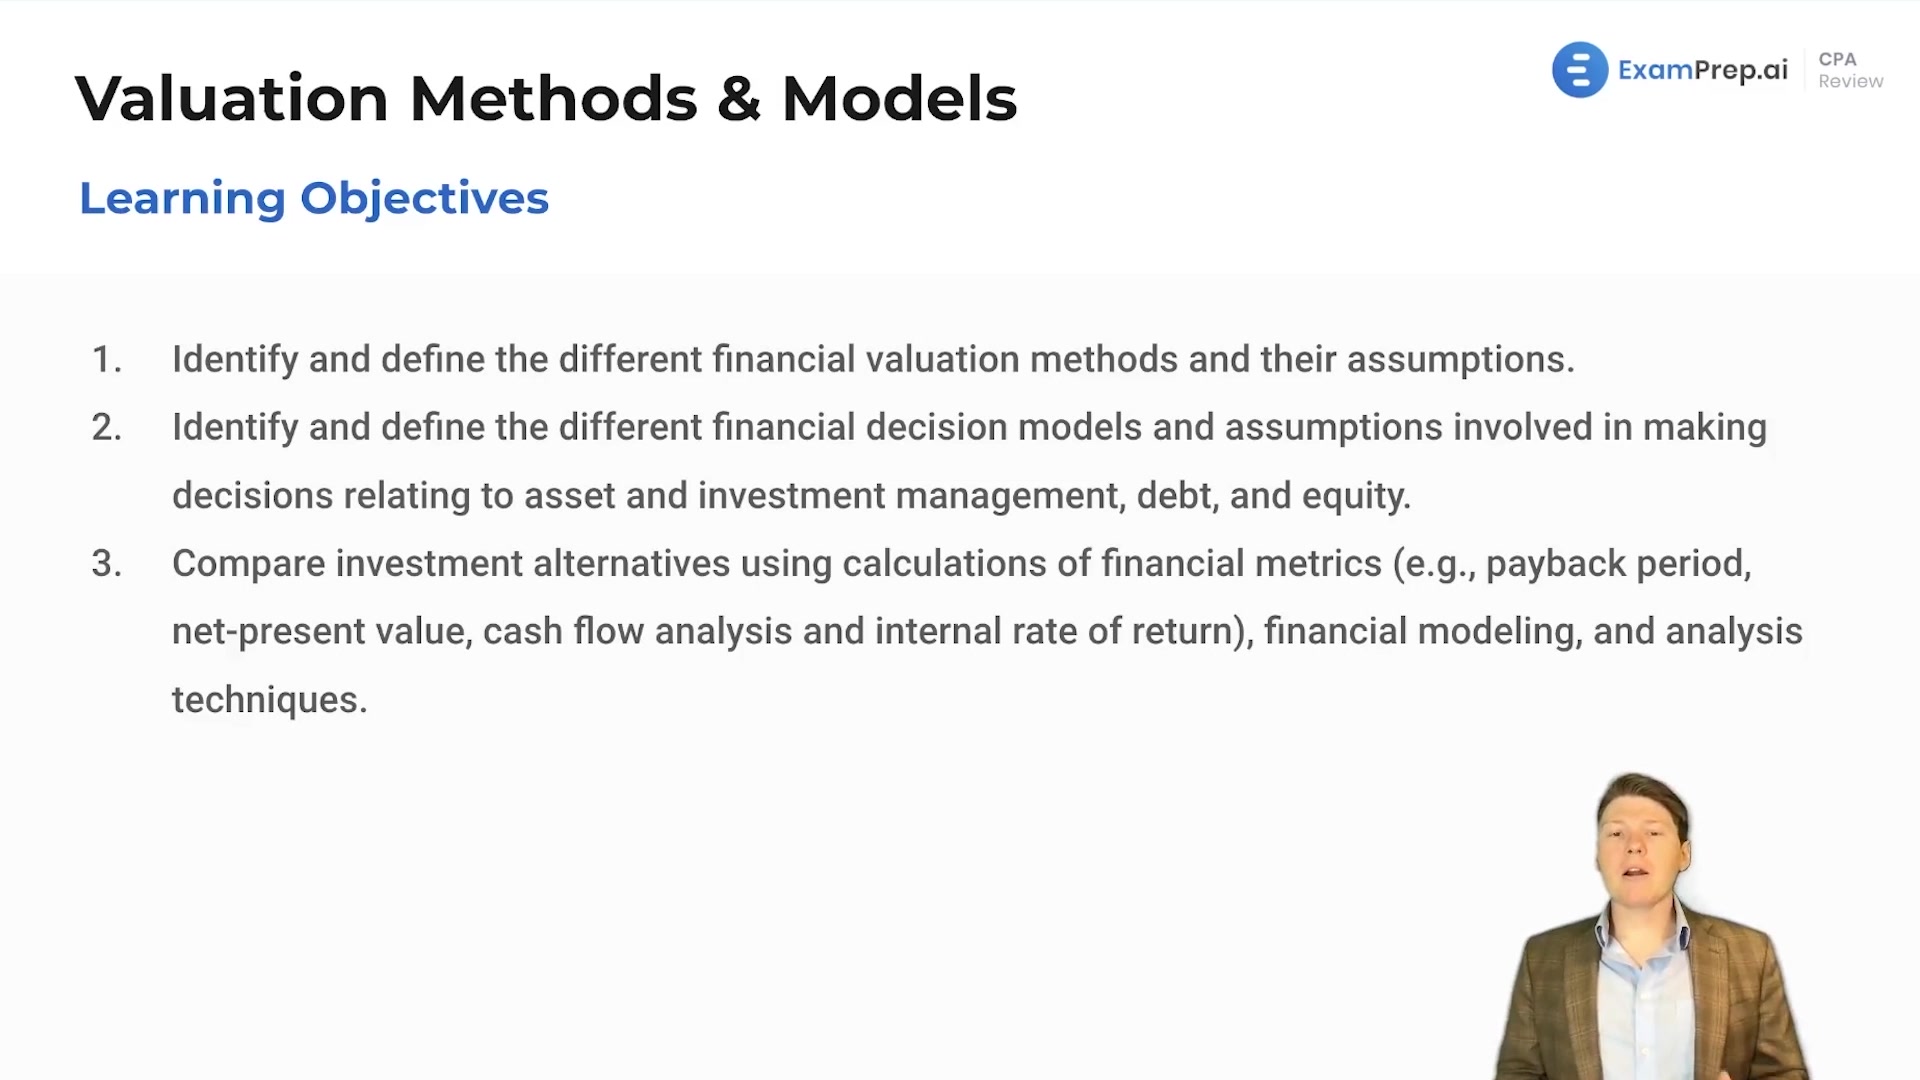 Valuation Methods and Models Overview and Objectives lesson thumbnail